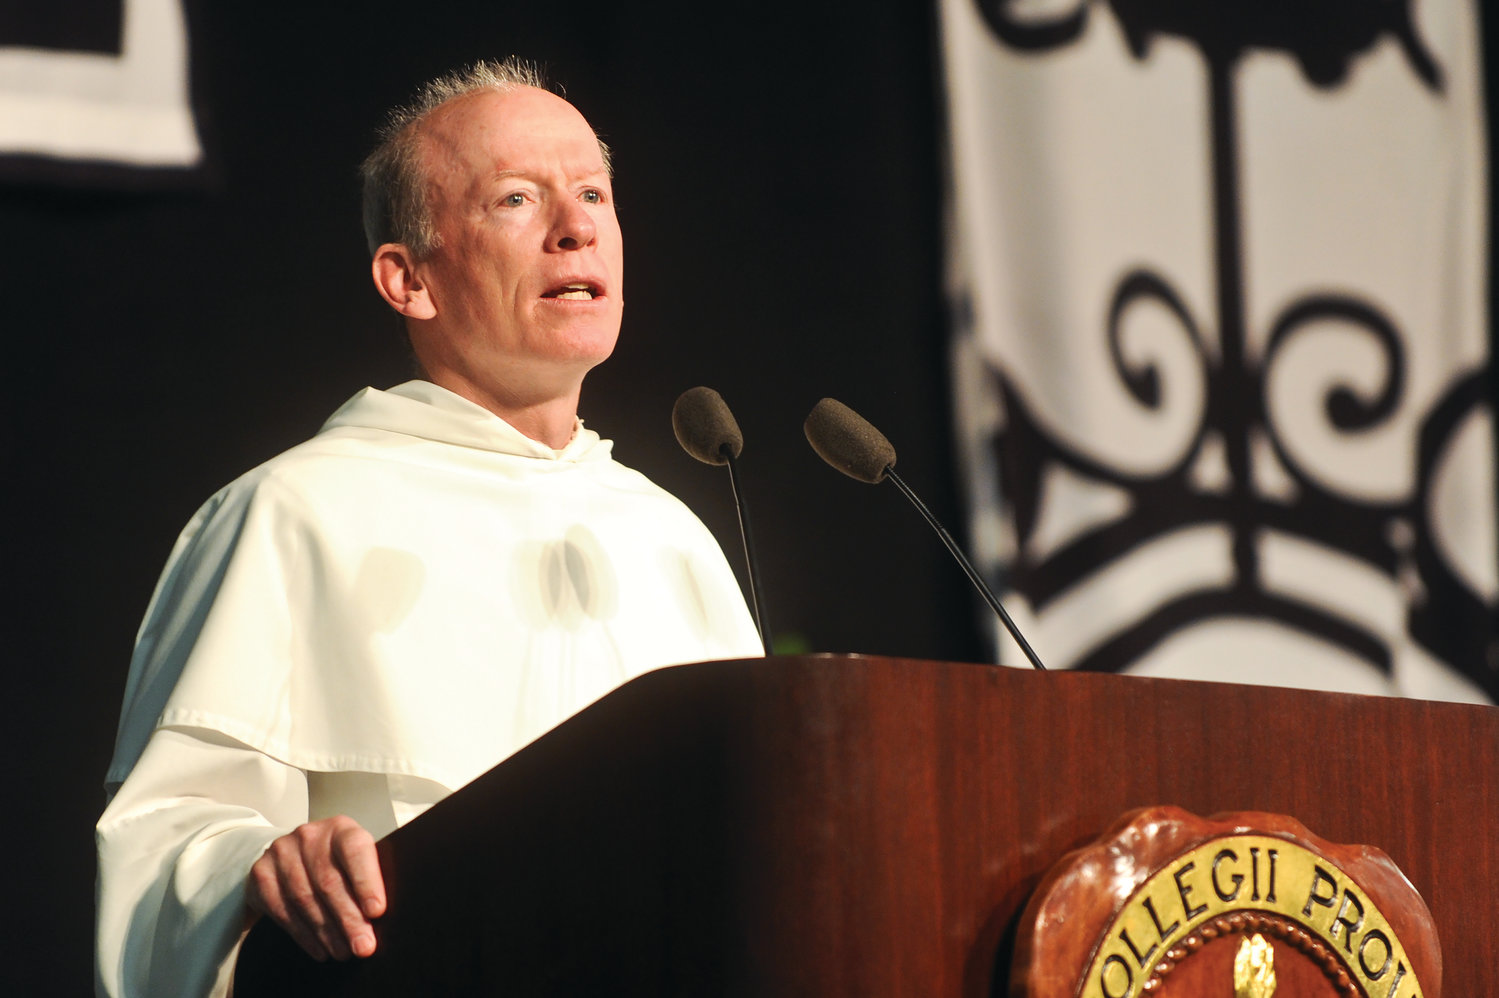 For 15 years, Providence College President Father Brian Shanley has been involved in nearly every facet of campus life. June 30 will make the end of his tenure as president of the college.